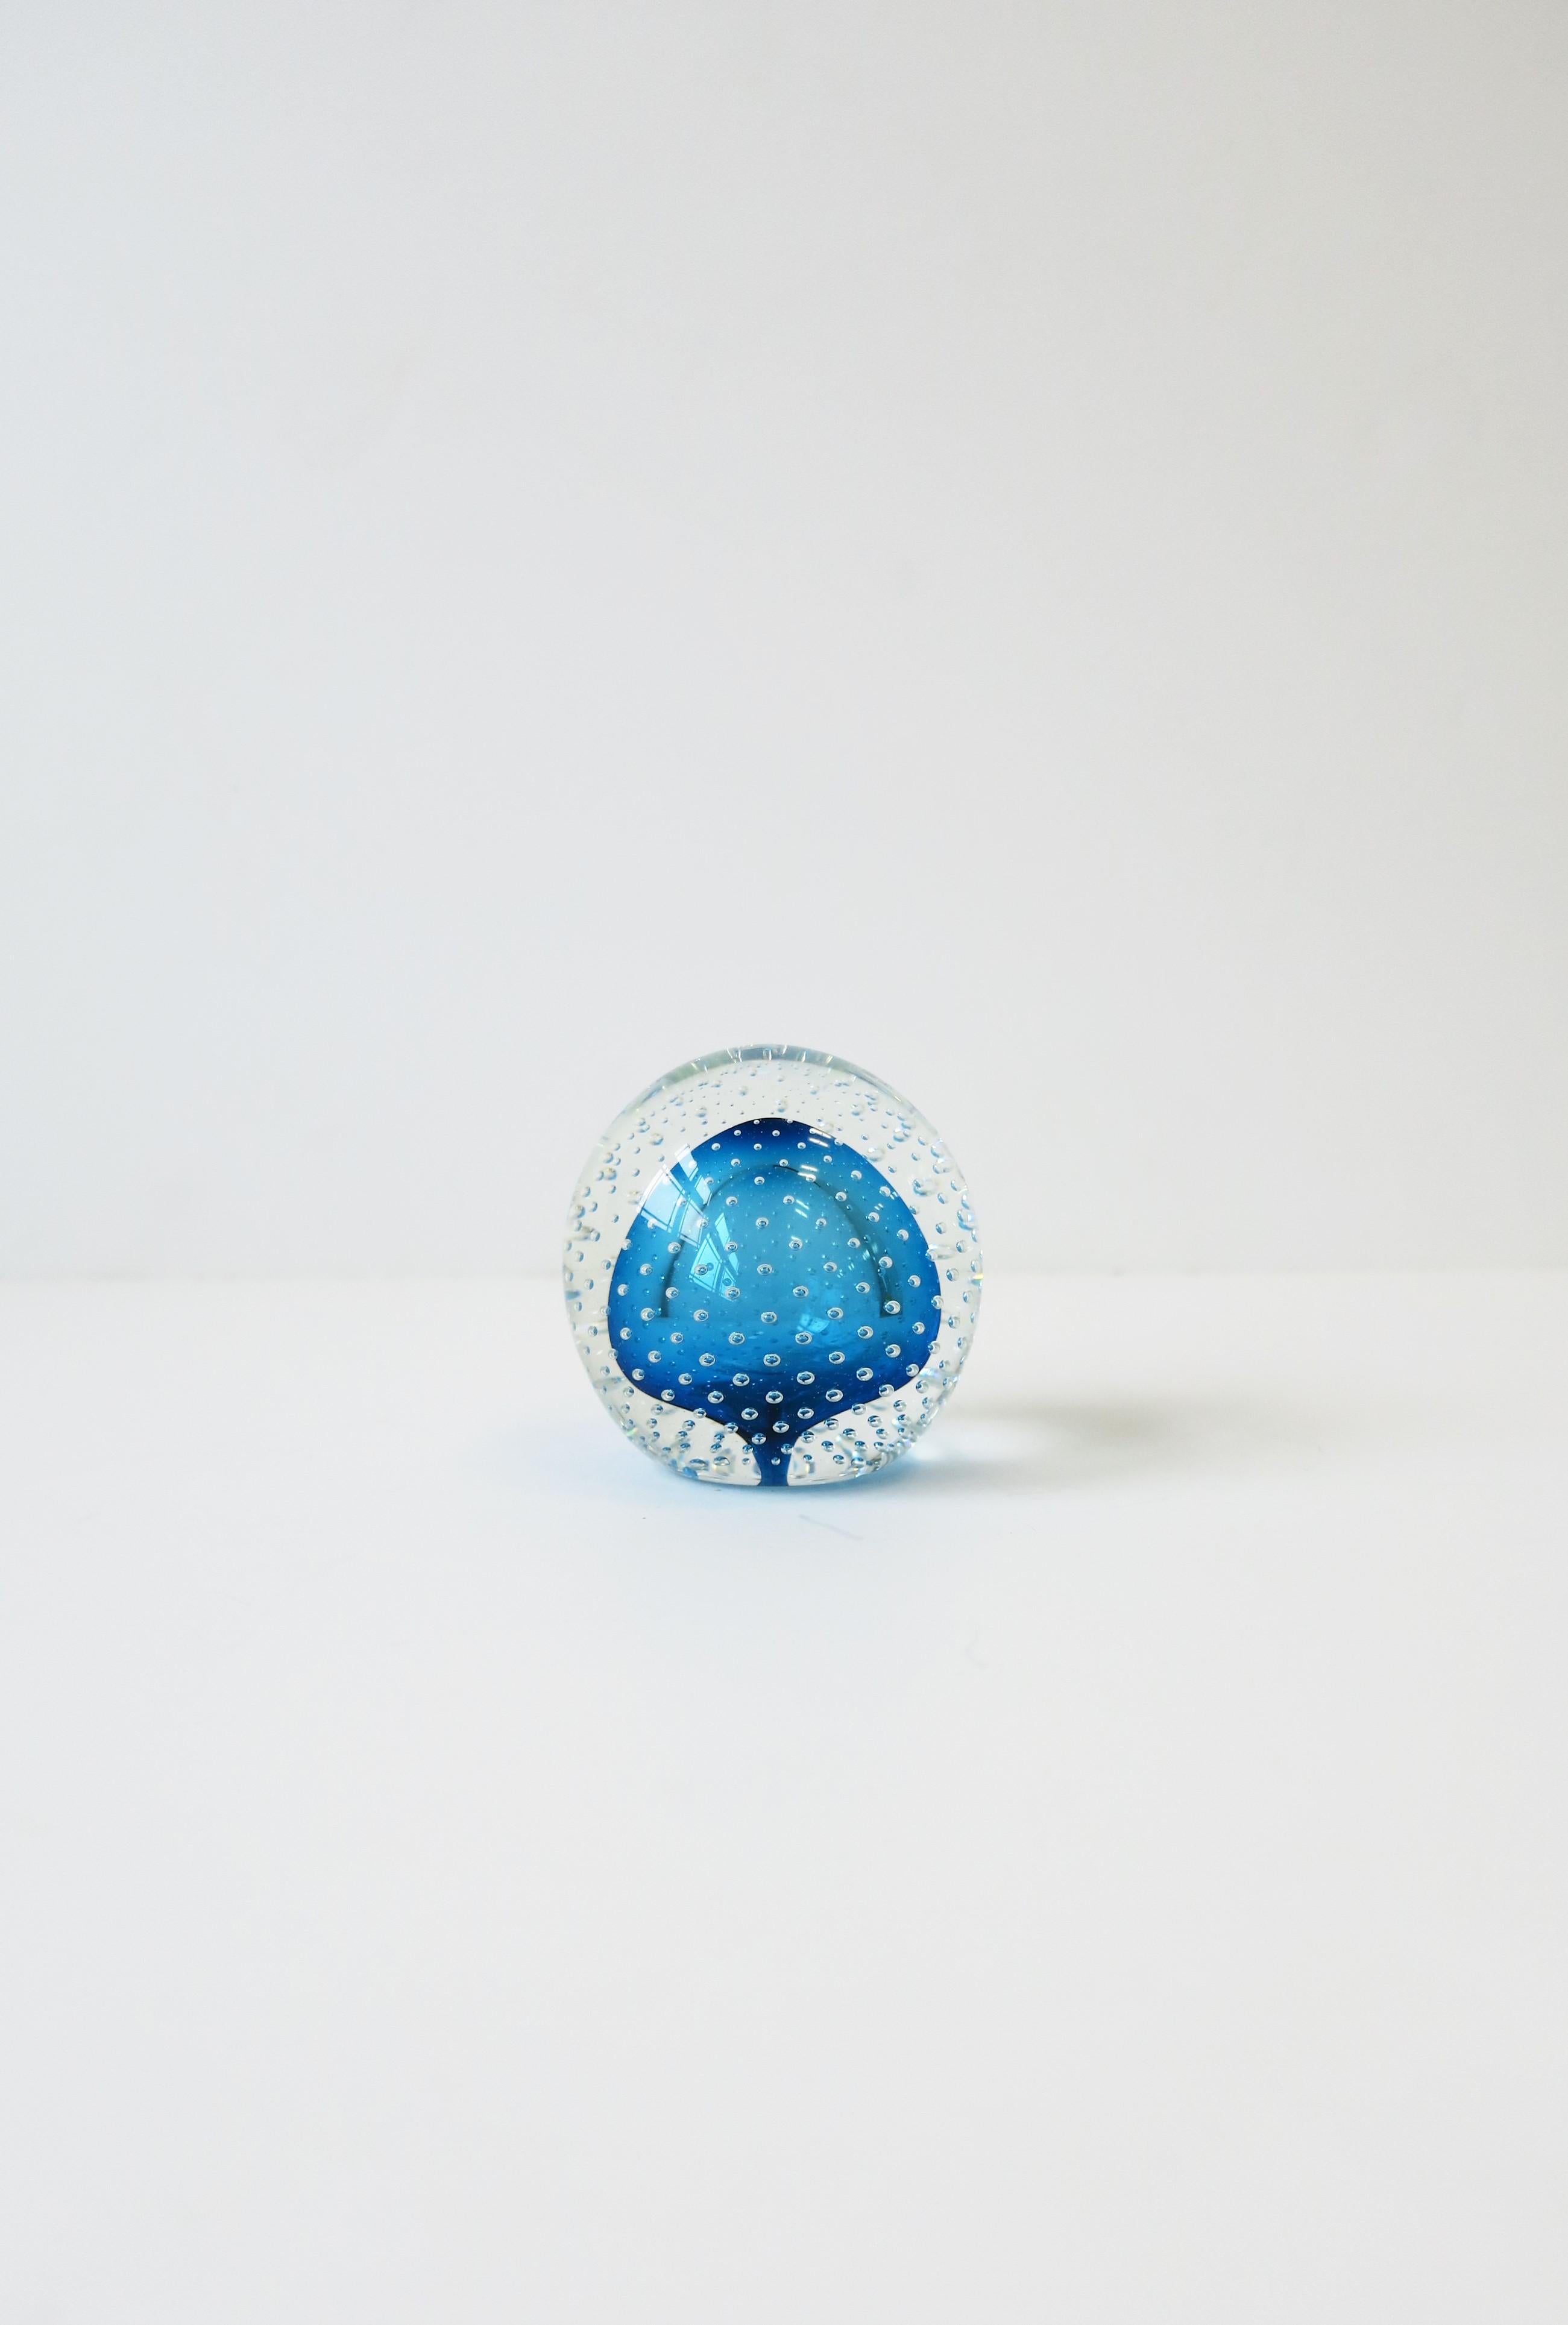 A very beautiful blue and clear art glass decorative object or paperweight with a 'controlled bubble' design, circa 1980s. Signed and dated by artist on bottom: Mark Matthew '1986'. 

Measures: 3.38